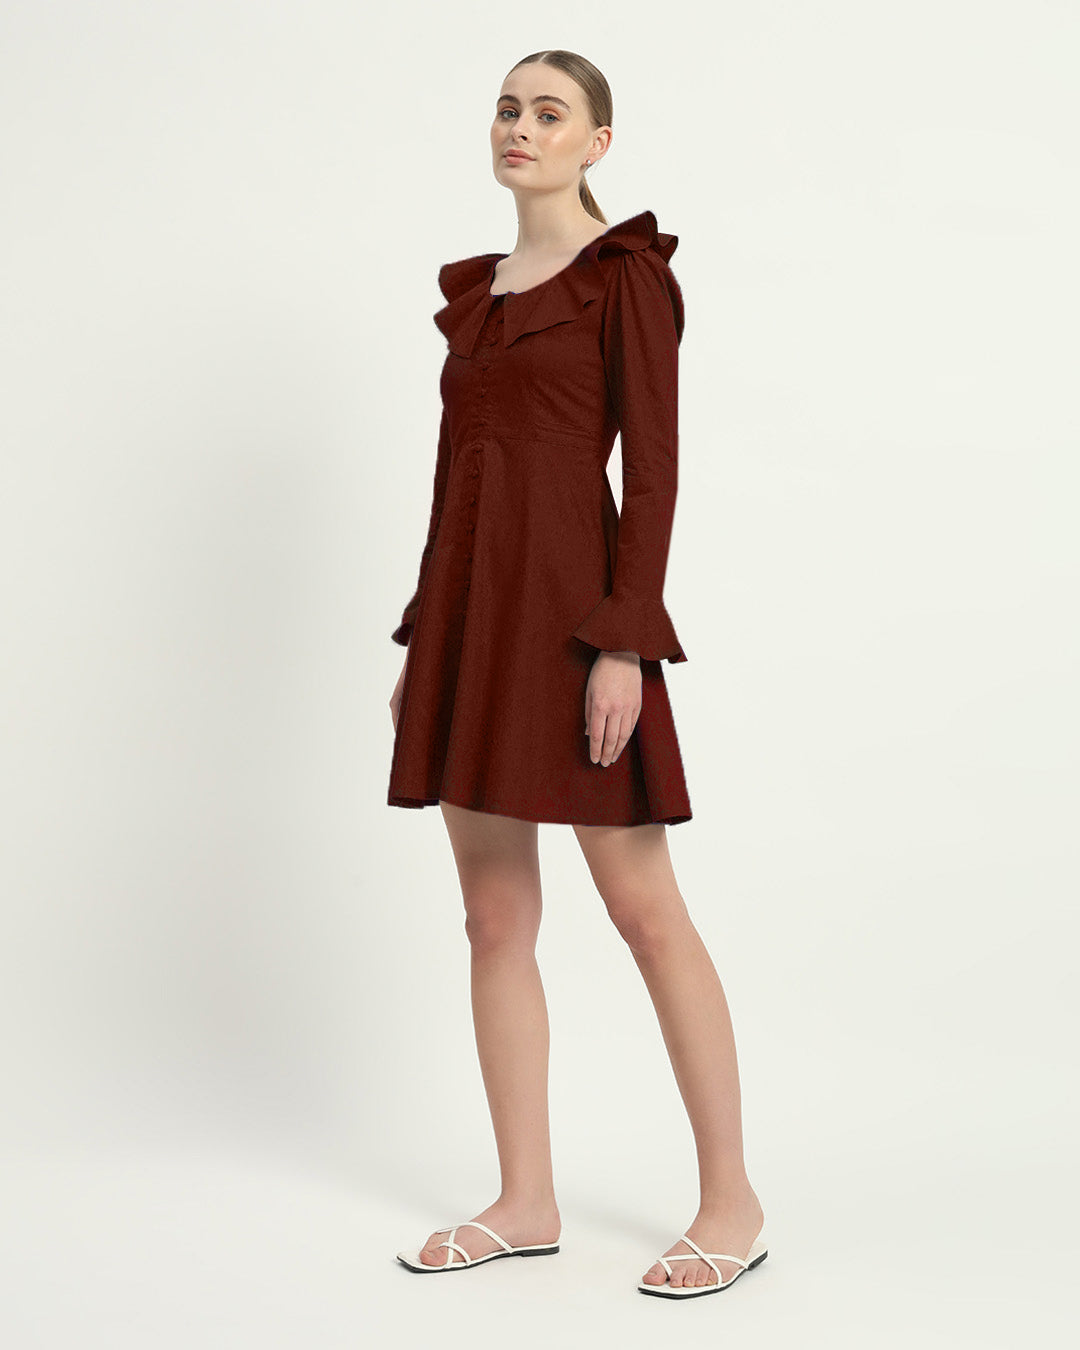 The Rouge Fredonia Cotton Dress